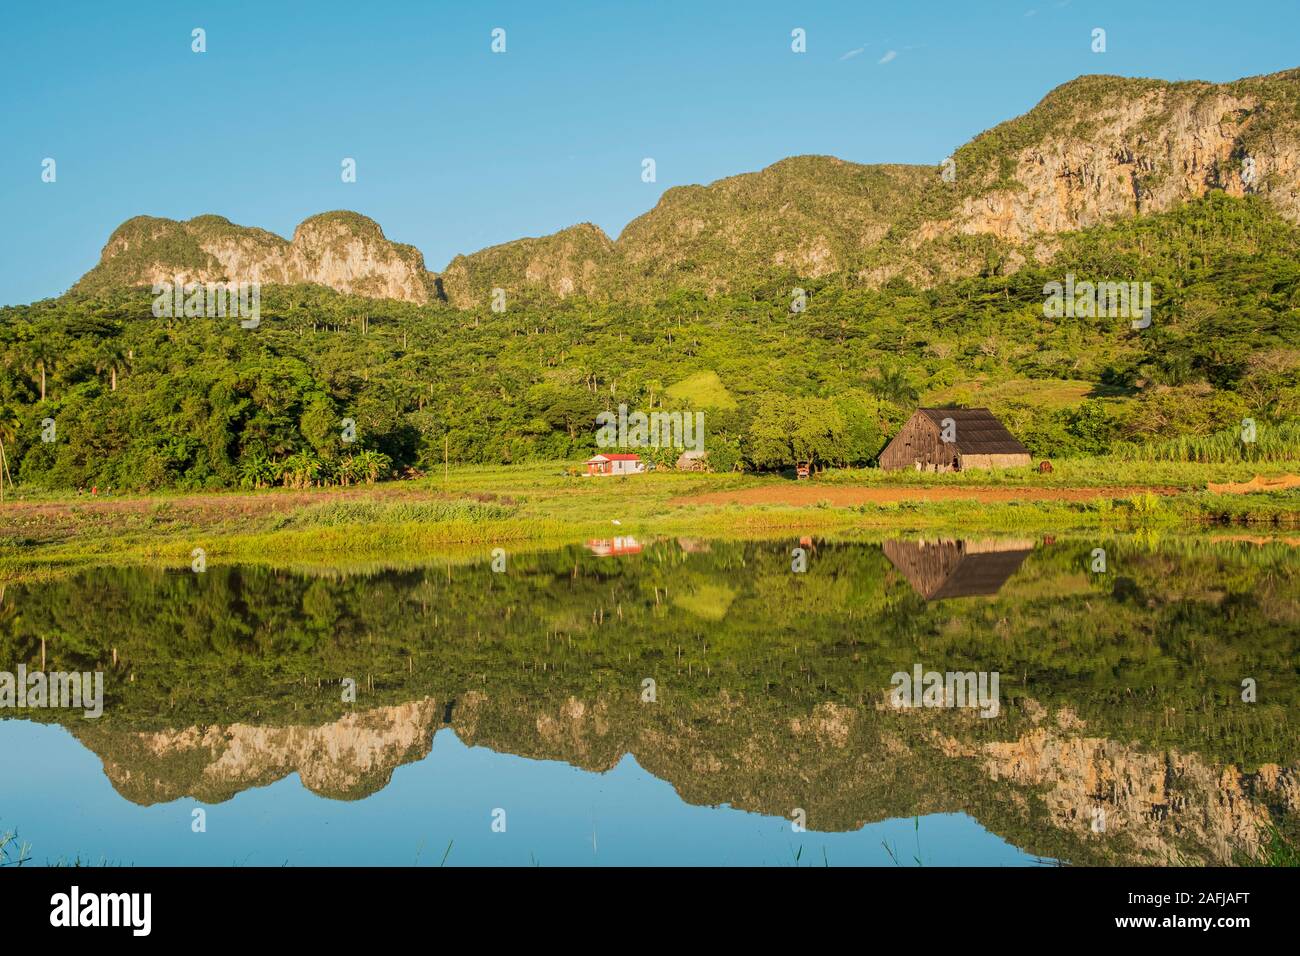 Landscape with lake in Vinales, one of the main tobocco production regions of Cuba. Stock Photo